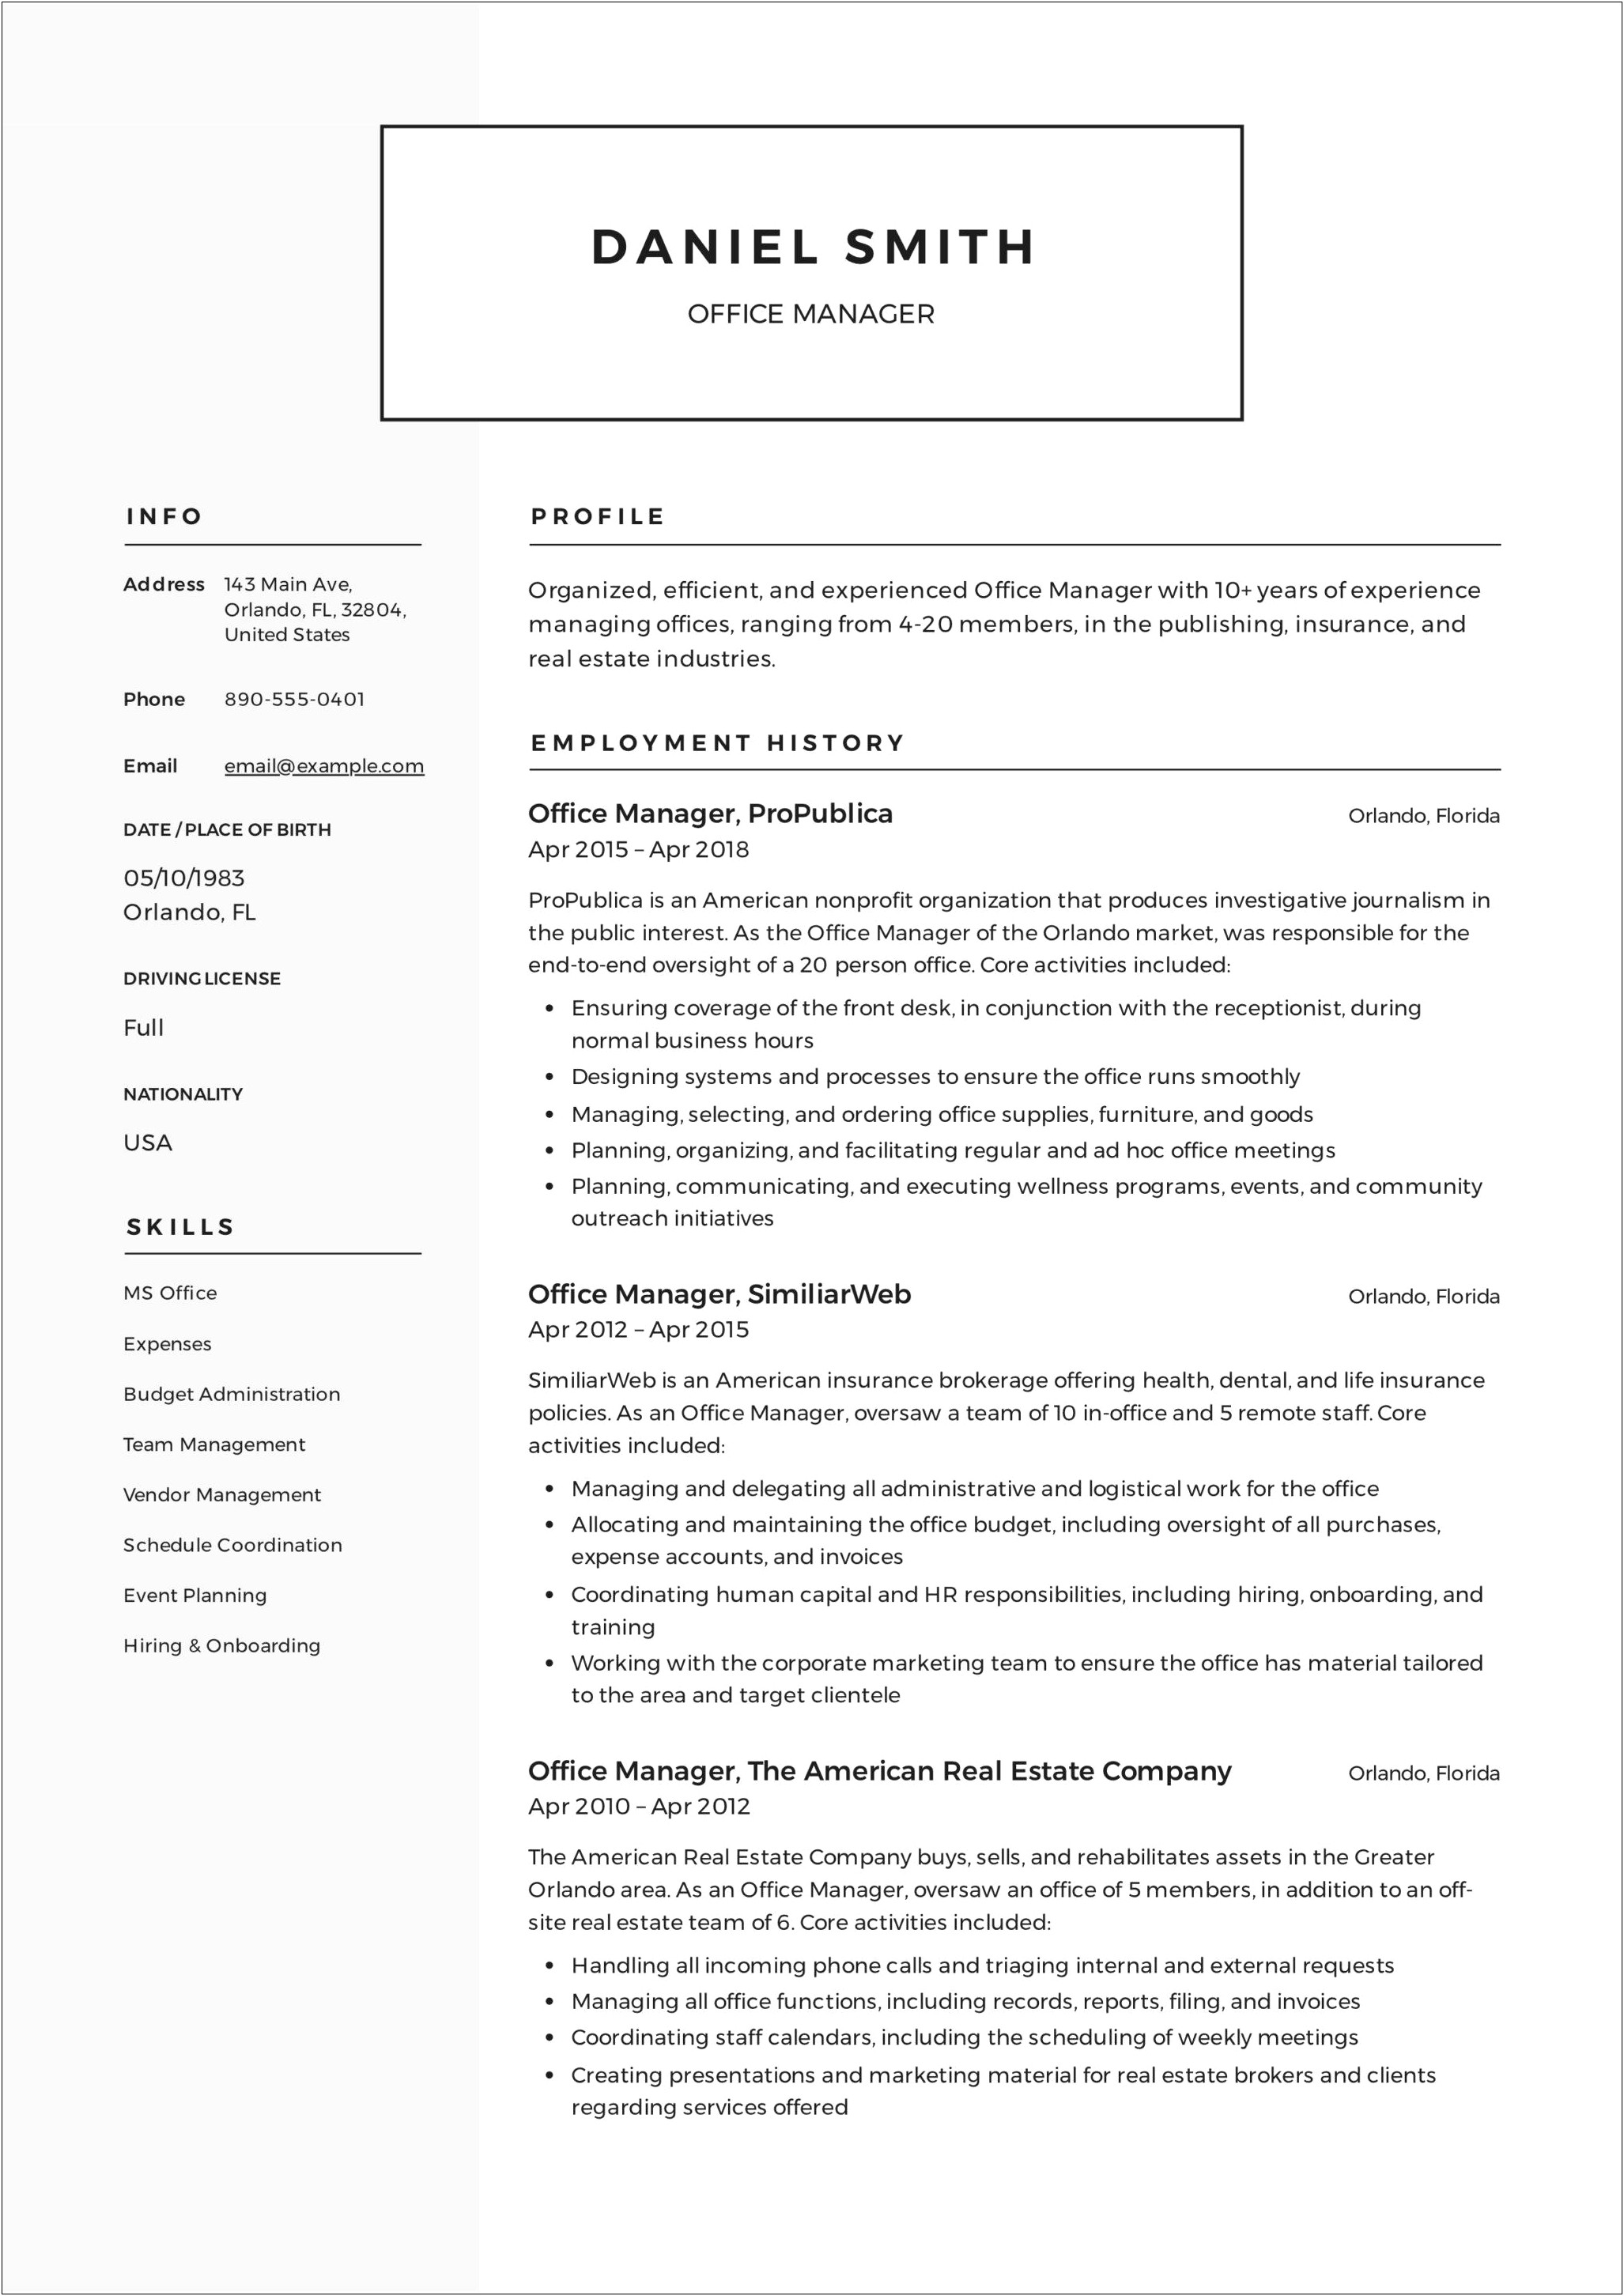 Functional Resume For Office Manager